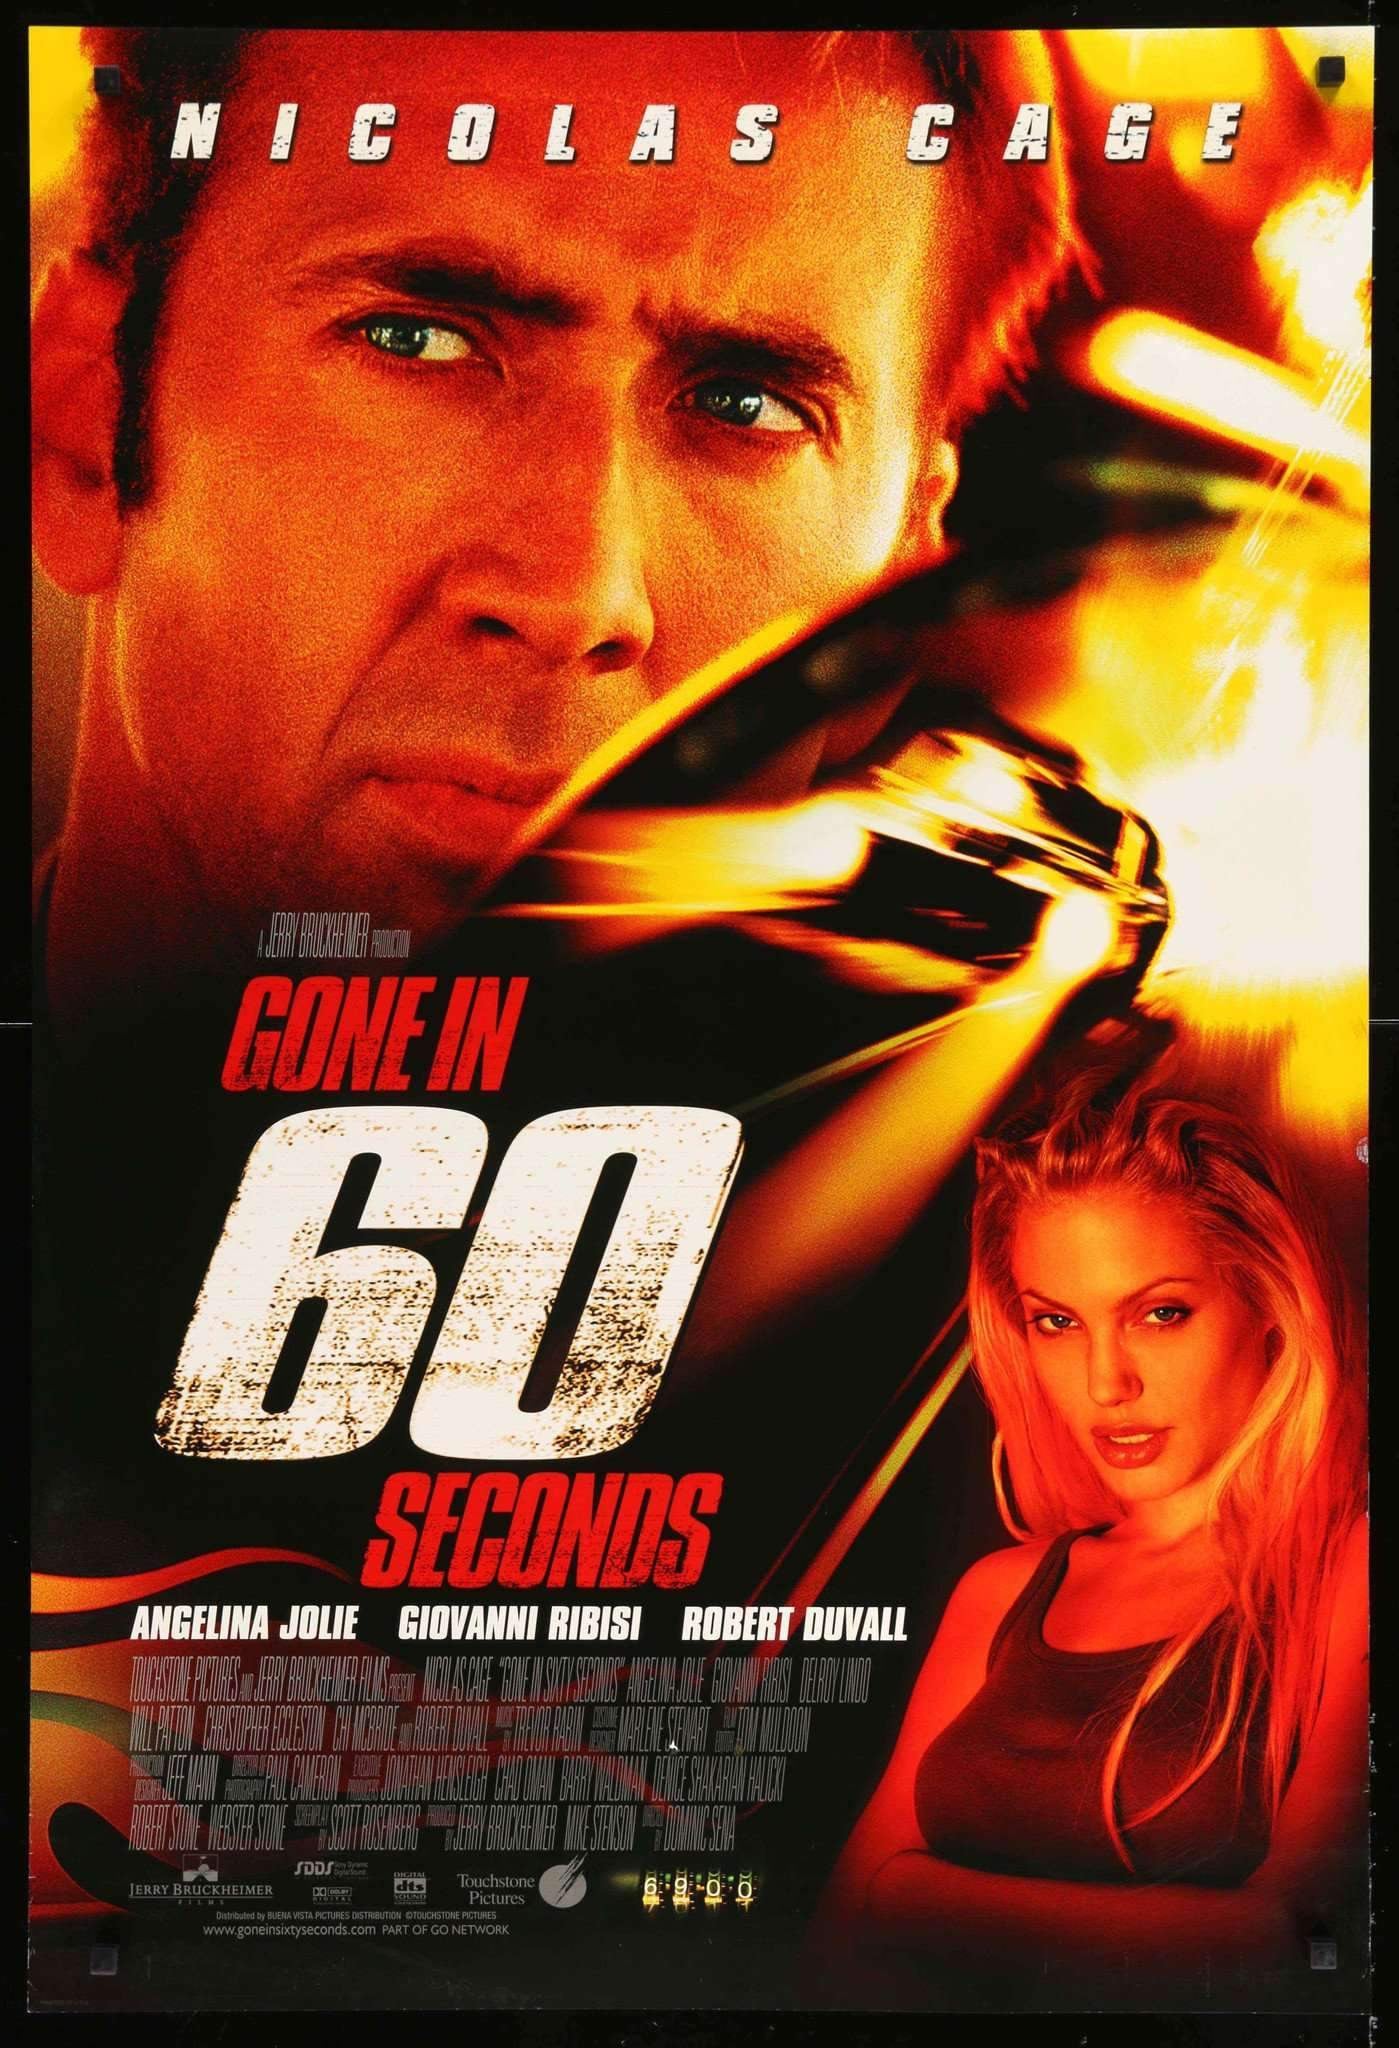 Gone in 60 Seconds (2000) Original One Sheet Movie Poster 27" x 40